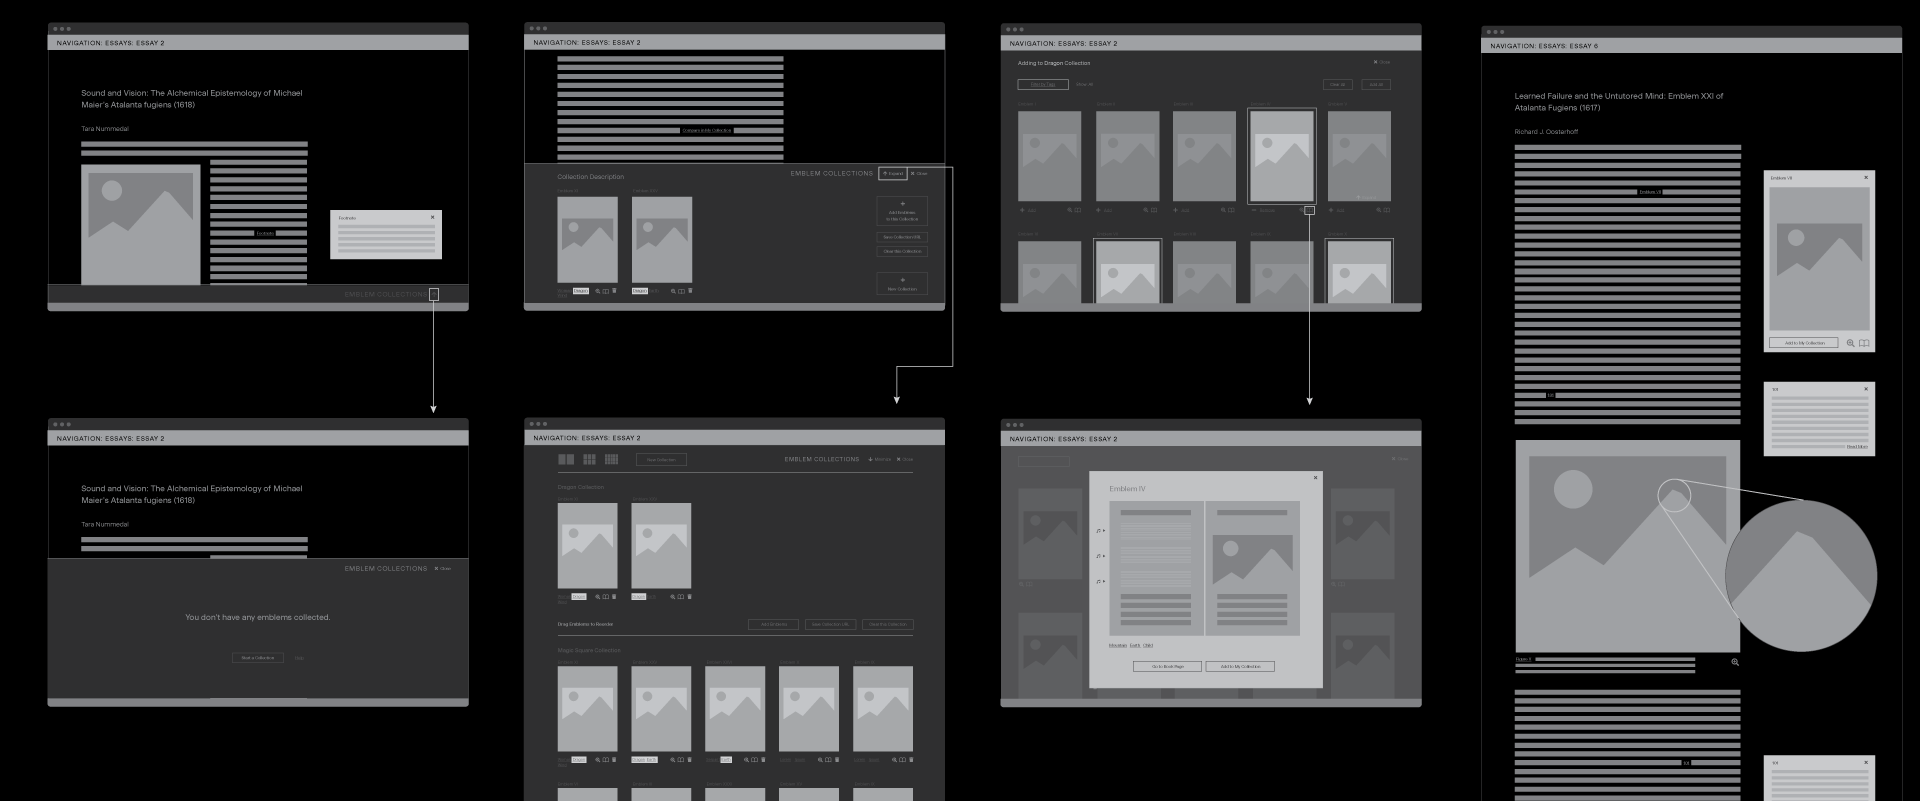 Wireframe for several screens